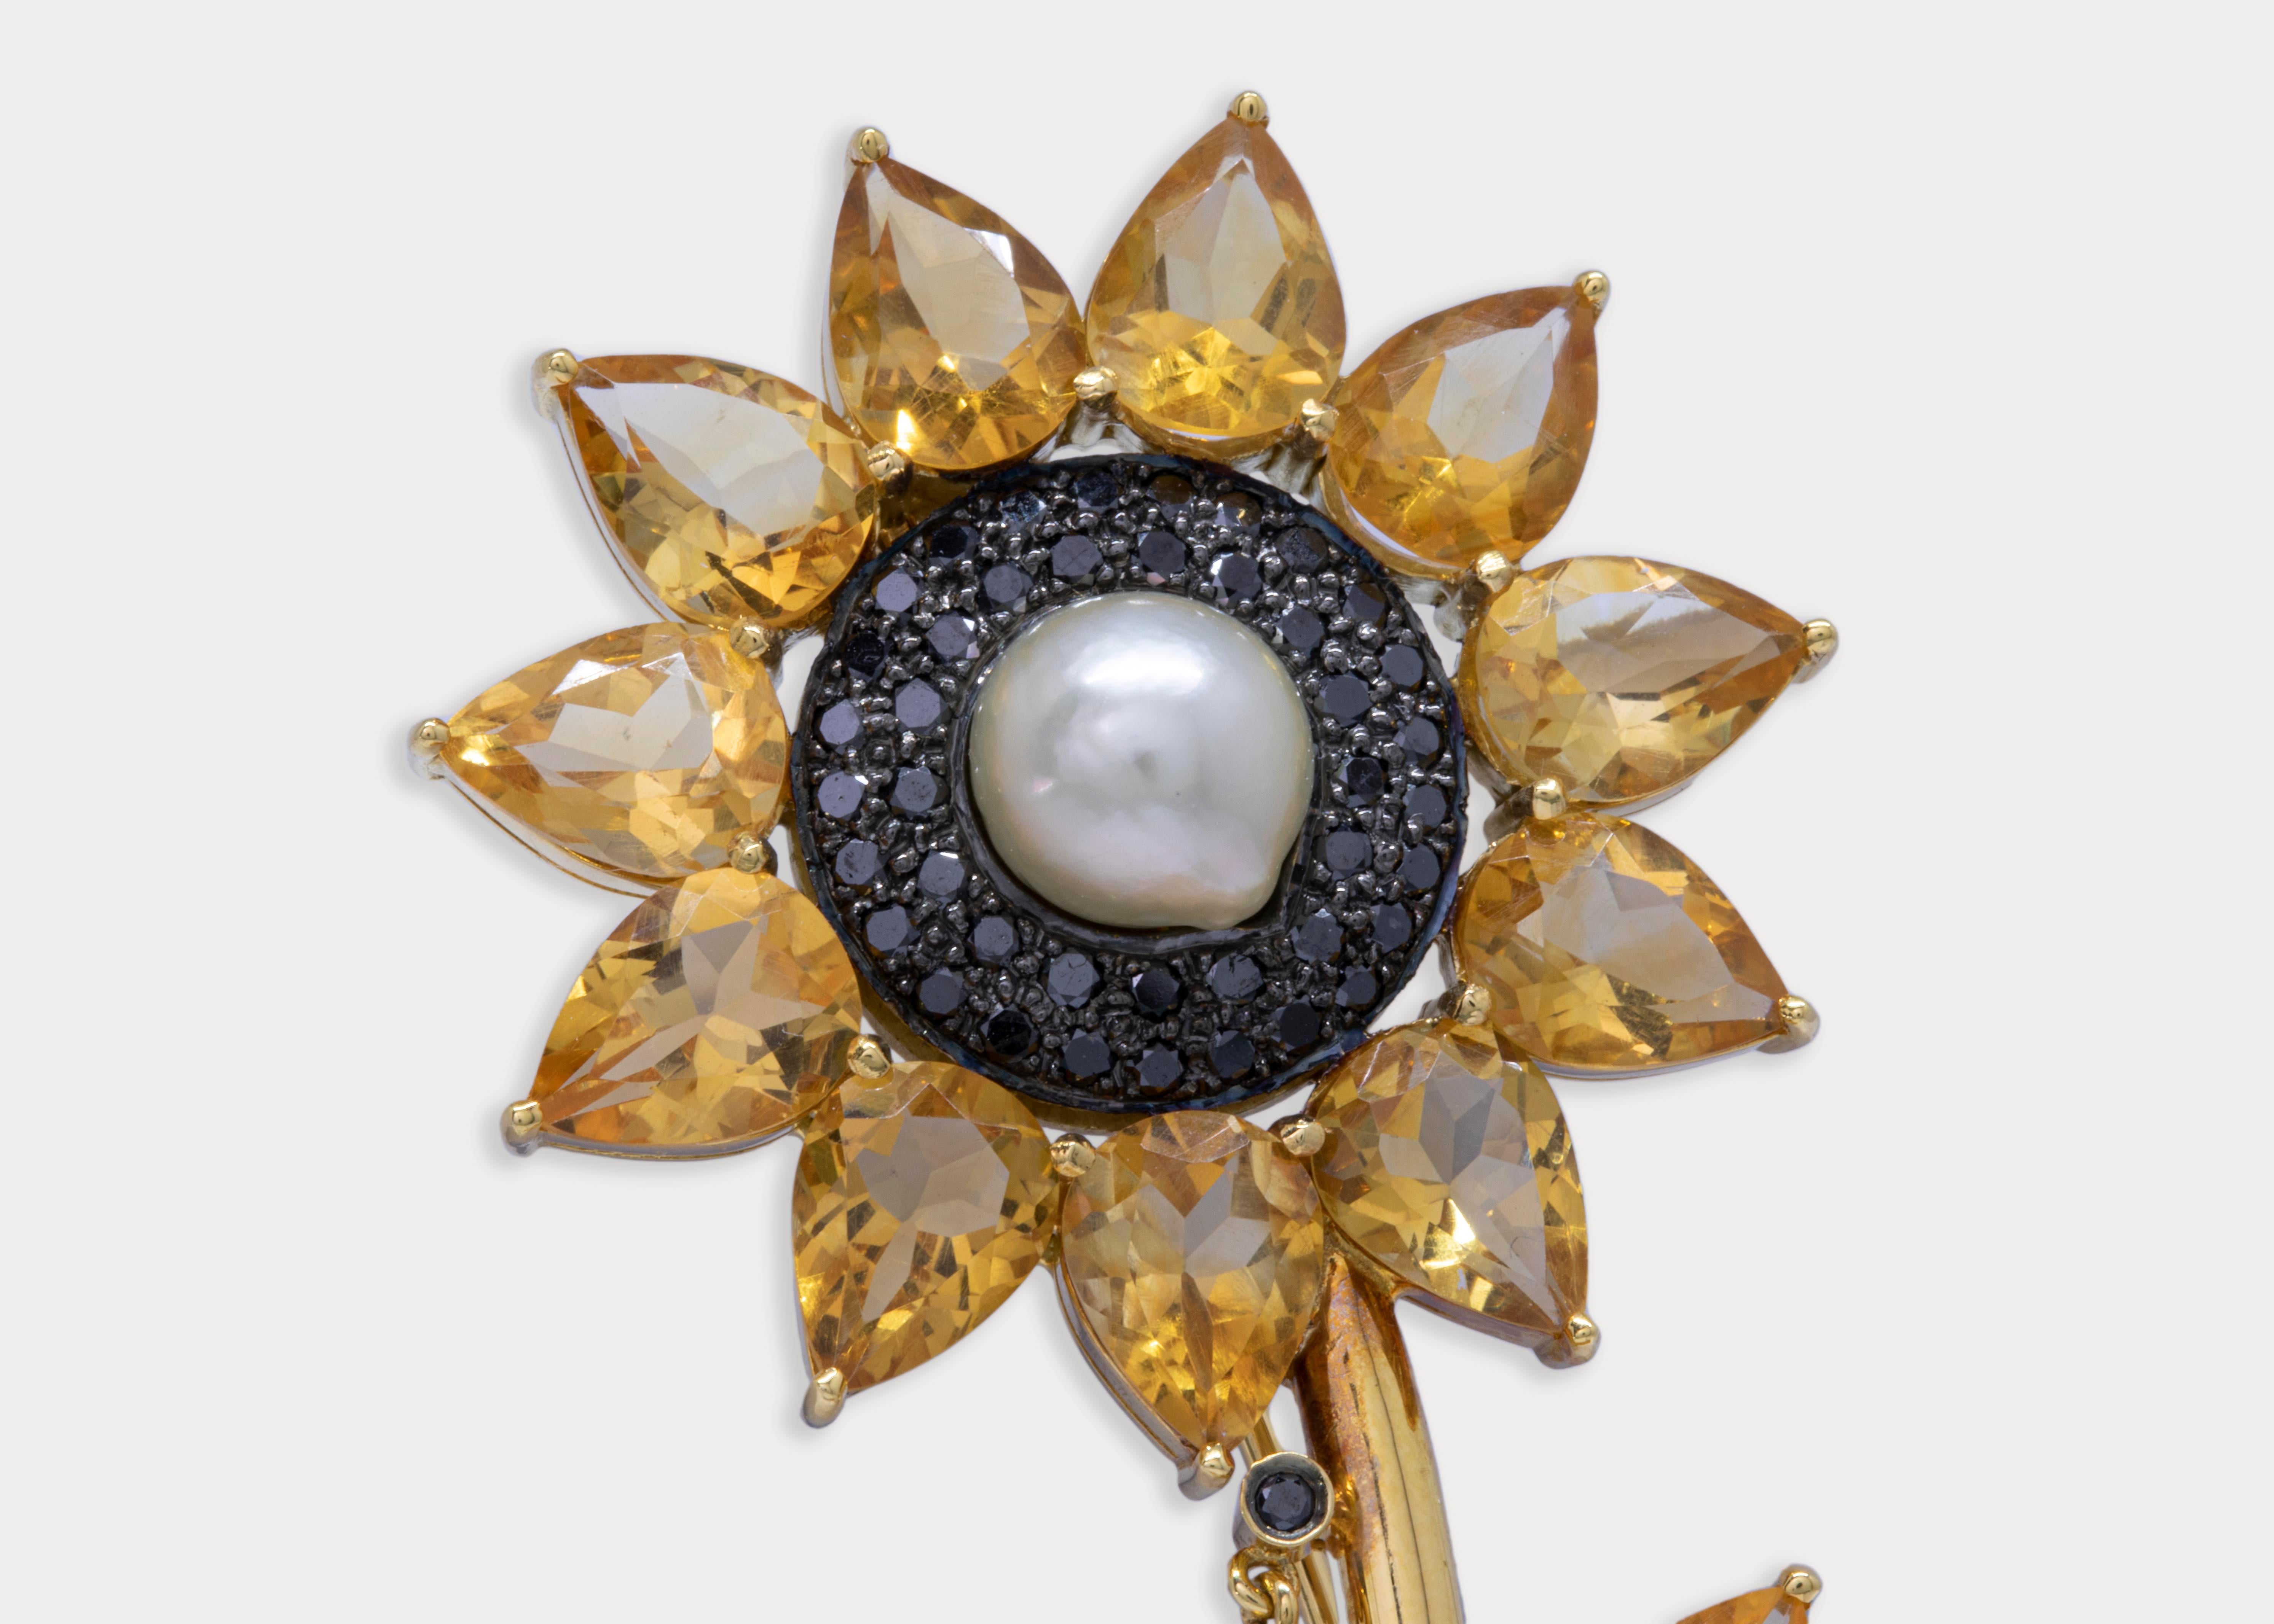 Identical citrine stones double as sunflower petals in this one of its kind 18k yellow gold brooch.
The center pearl is surrounded by black diamonds .

Gold Weight: 16.9 g
5 Pearls Weight: 6.04 ct.
Citrine Weight: 13.35 ct.
Black Diamonds Weight: